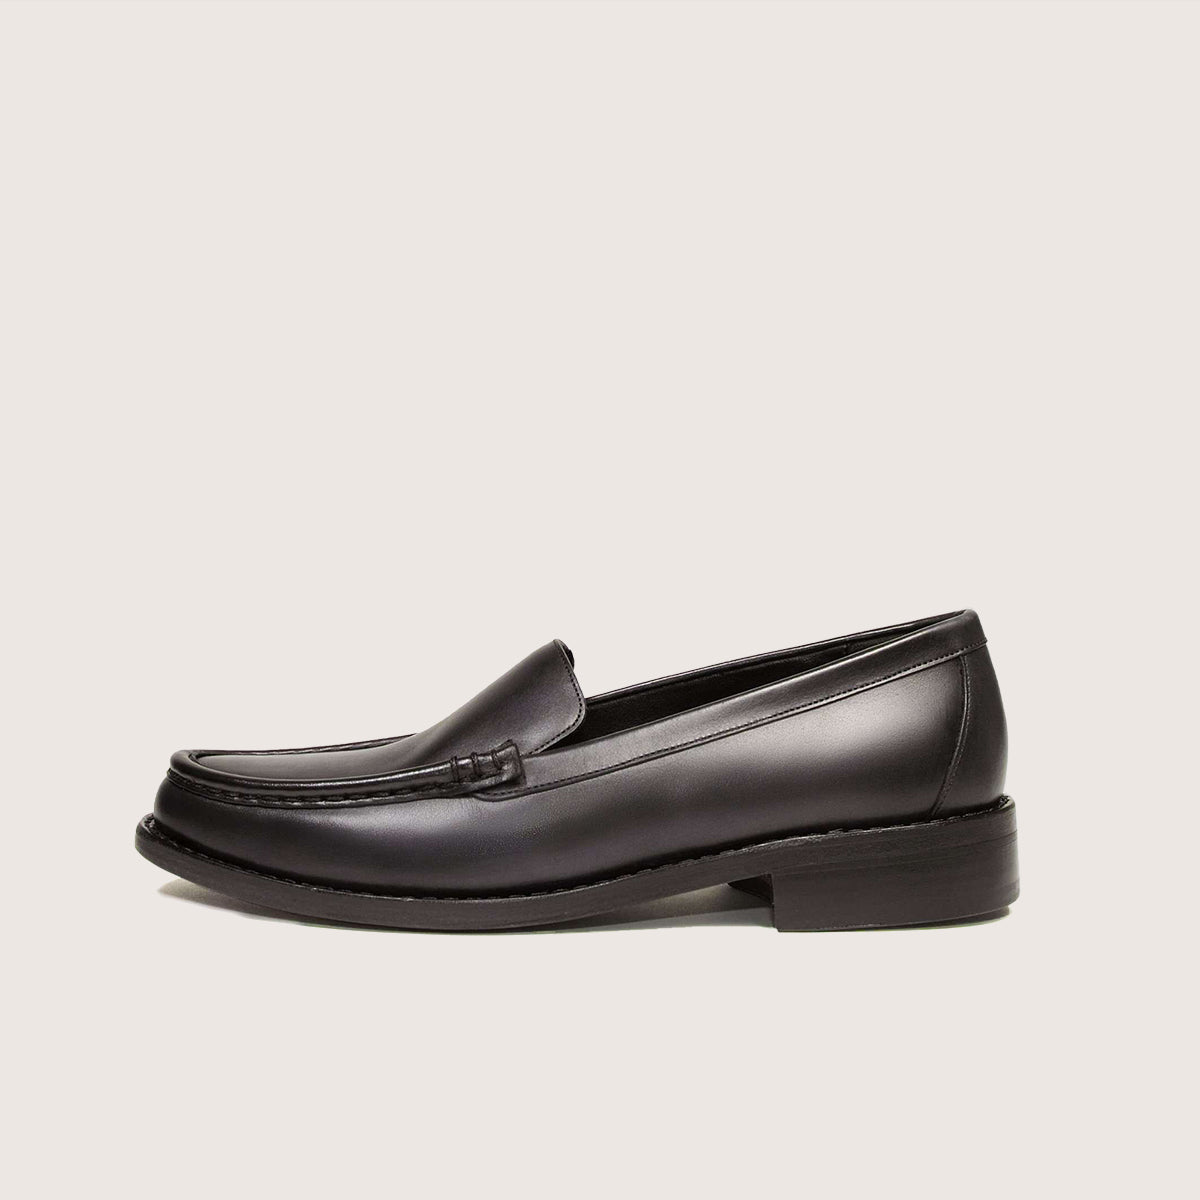 leather-loafer-1er-jour-made-in-France-with-italian-box-leather-profile-photo